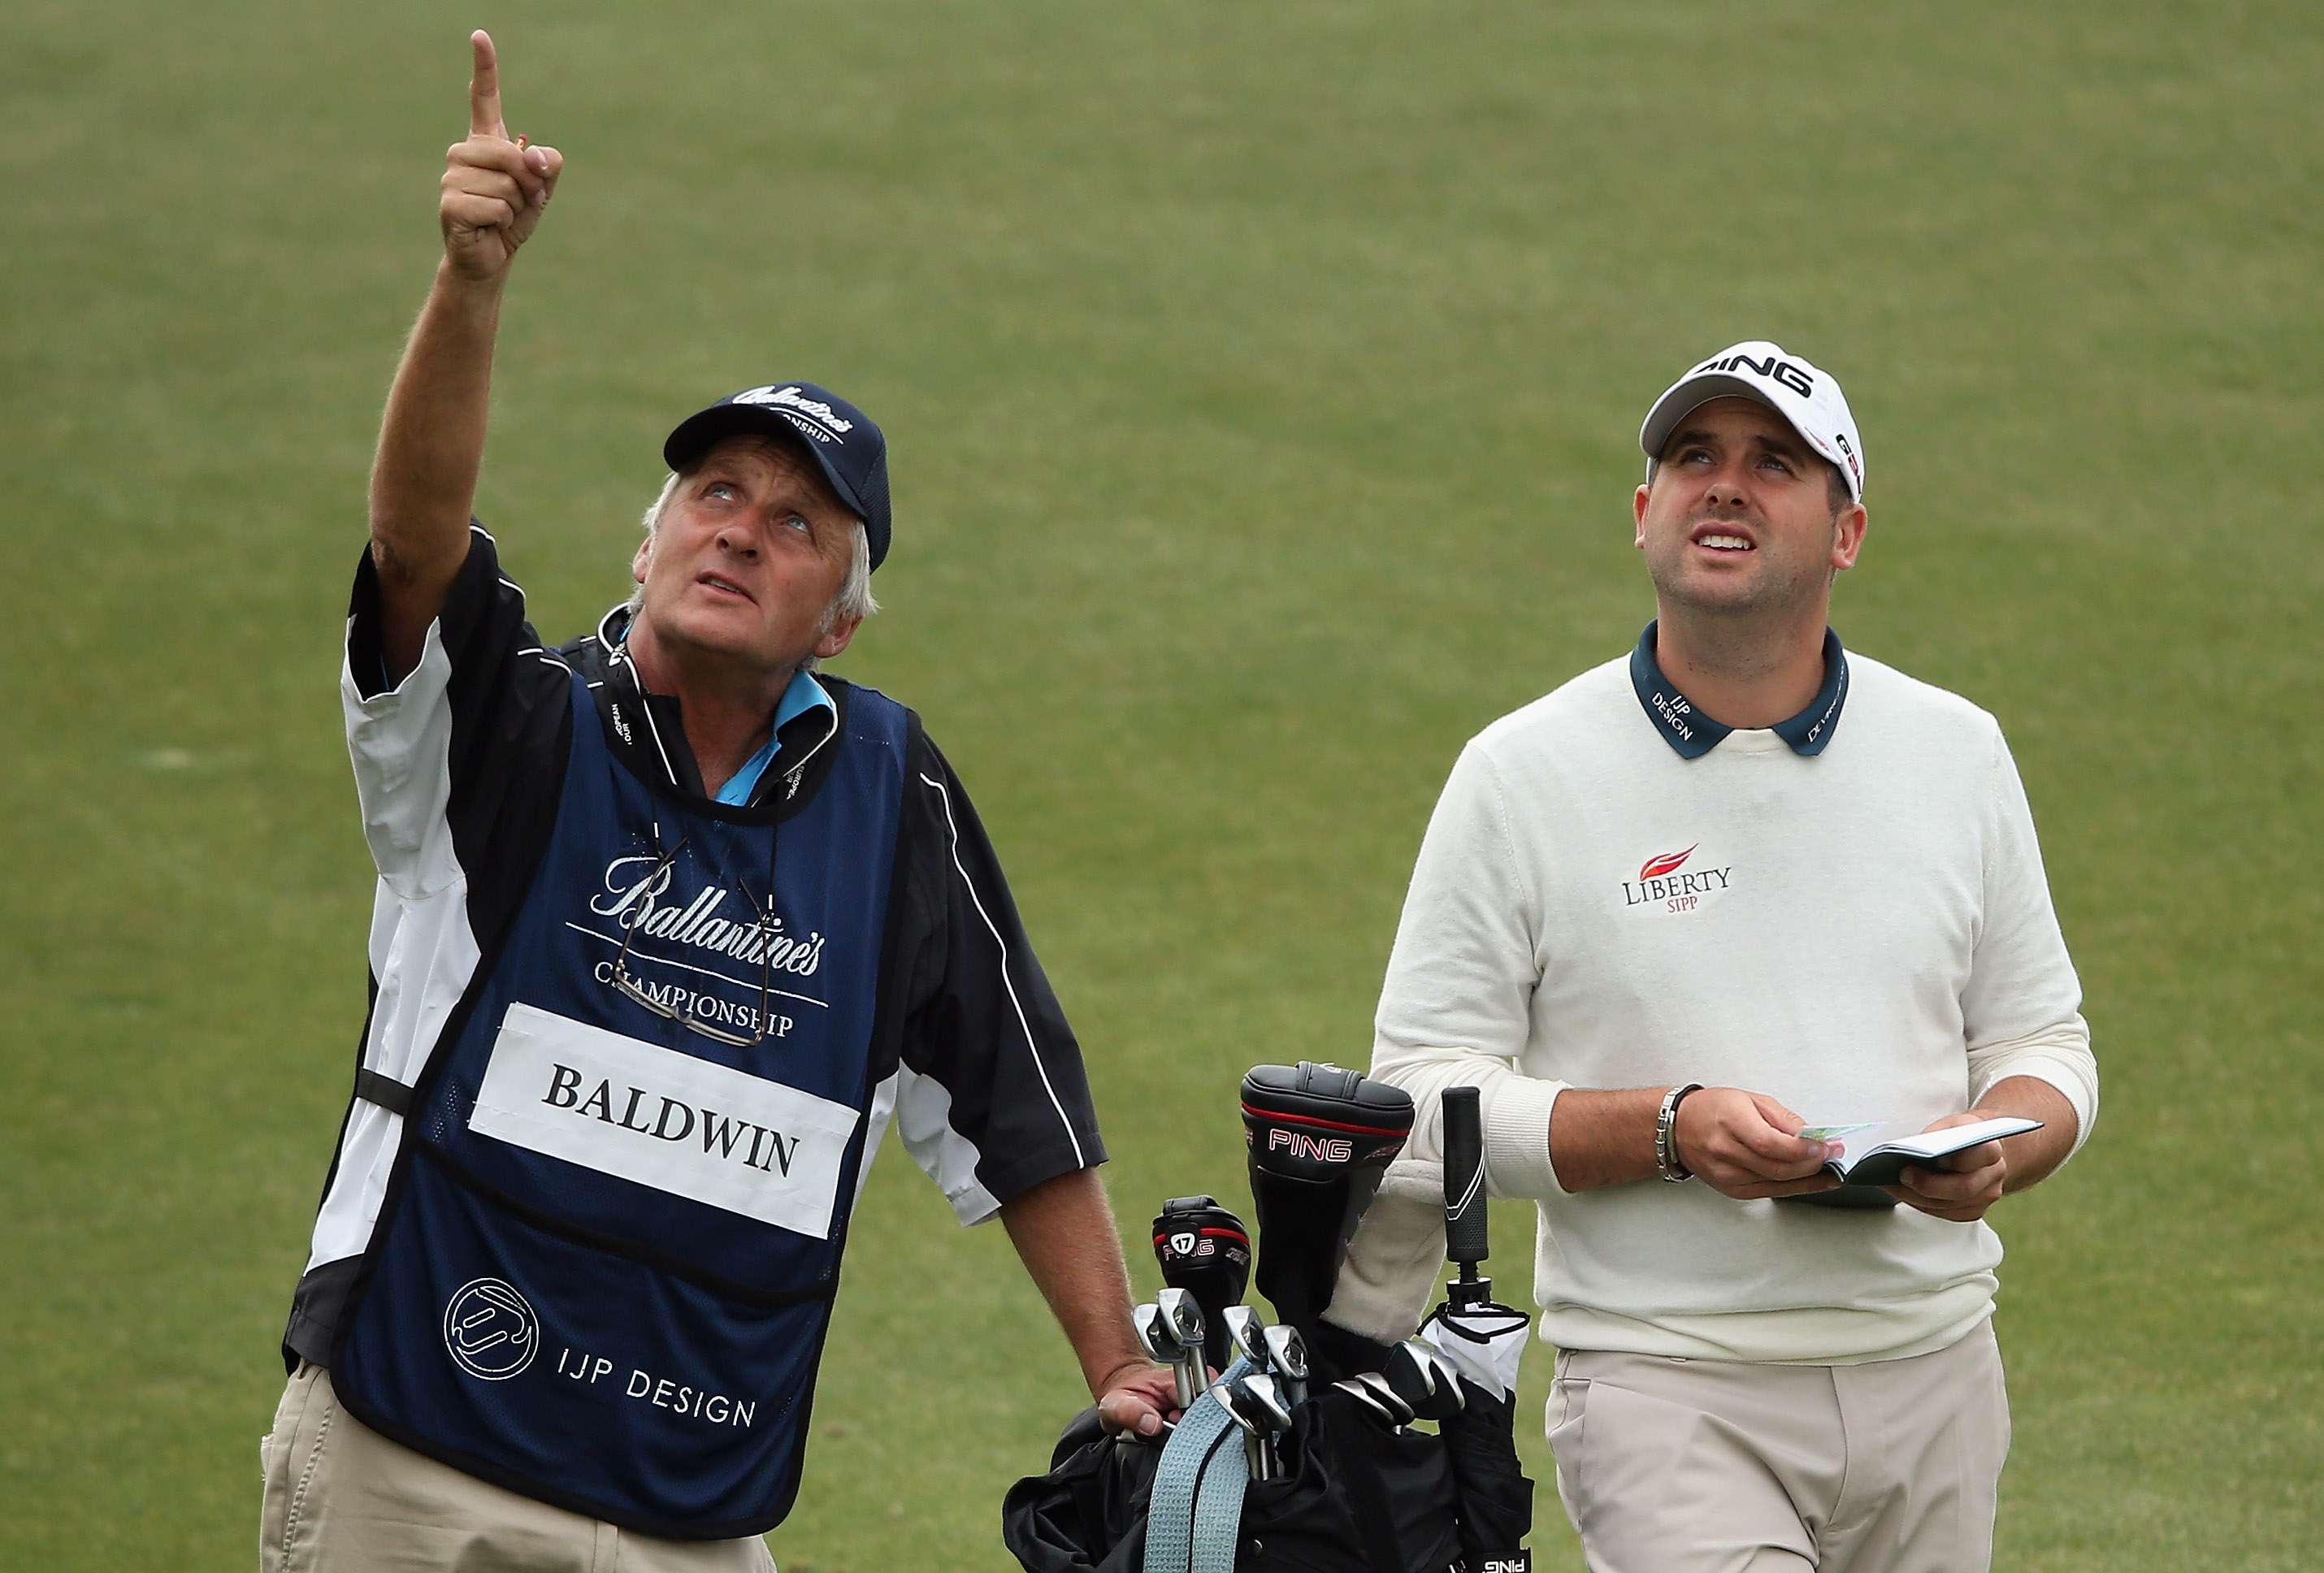 Forecasting: Matthew Baldwin, right, and Julian Phillips consider the weather as the Ballantine's Championship gets underway (Photo by Andrew Redington/Getty Images)